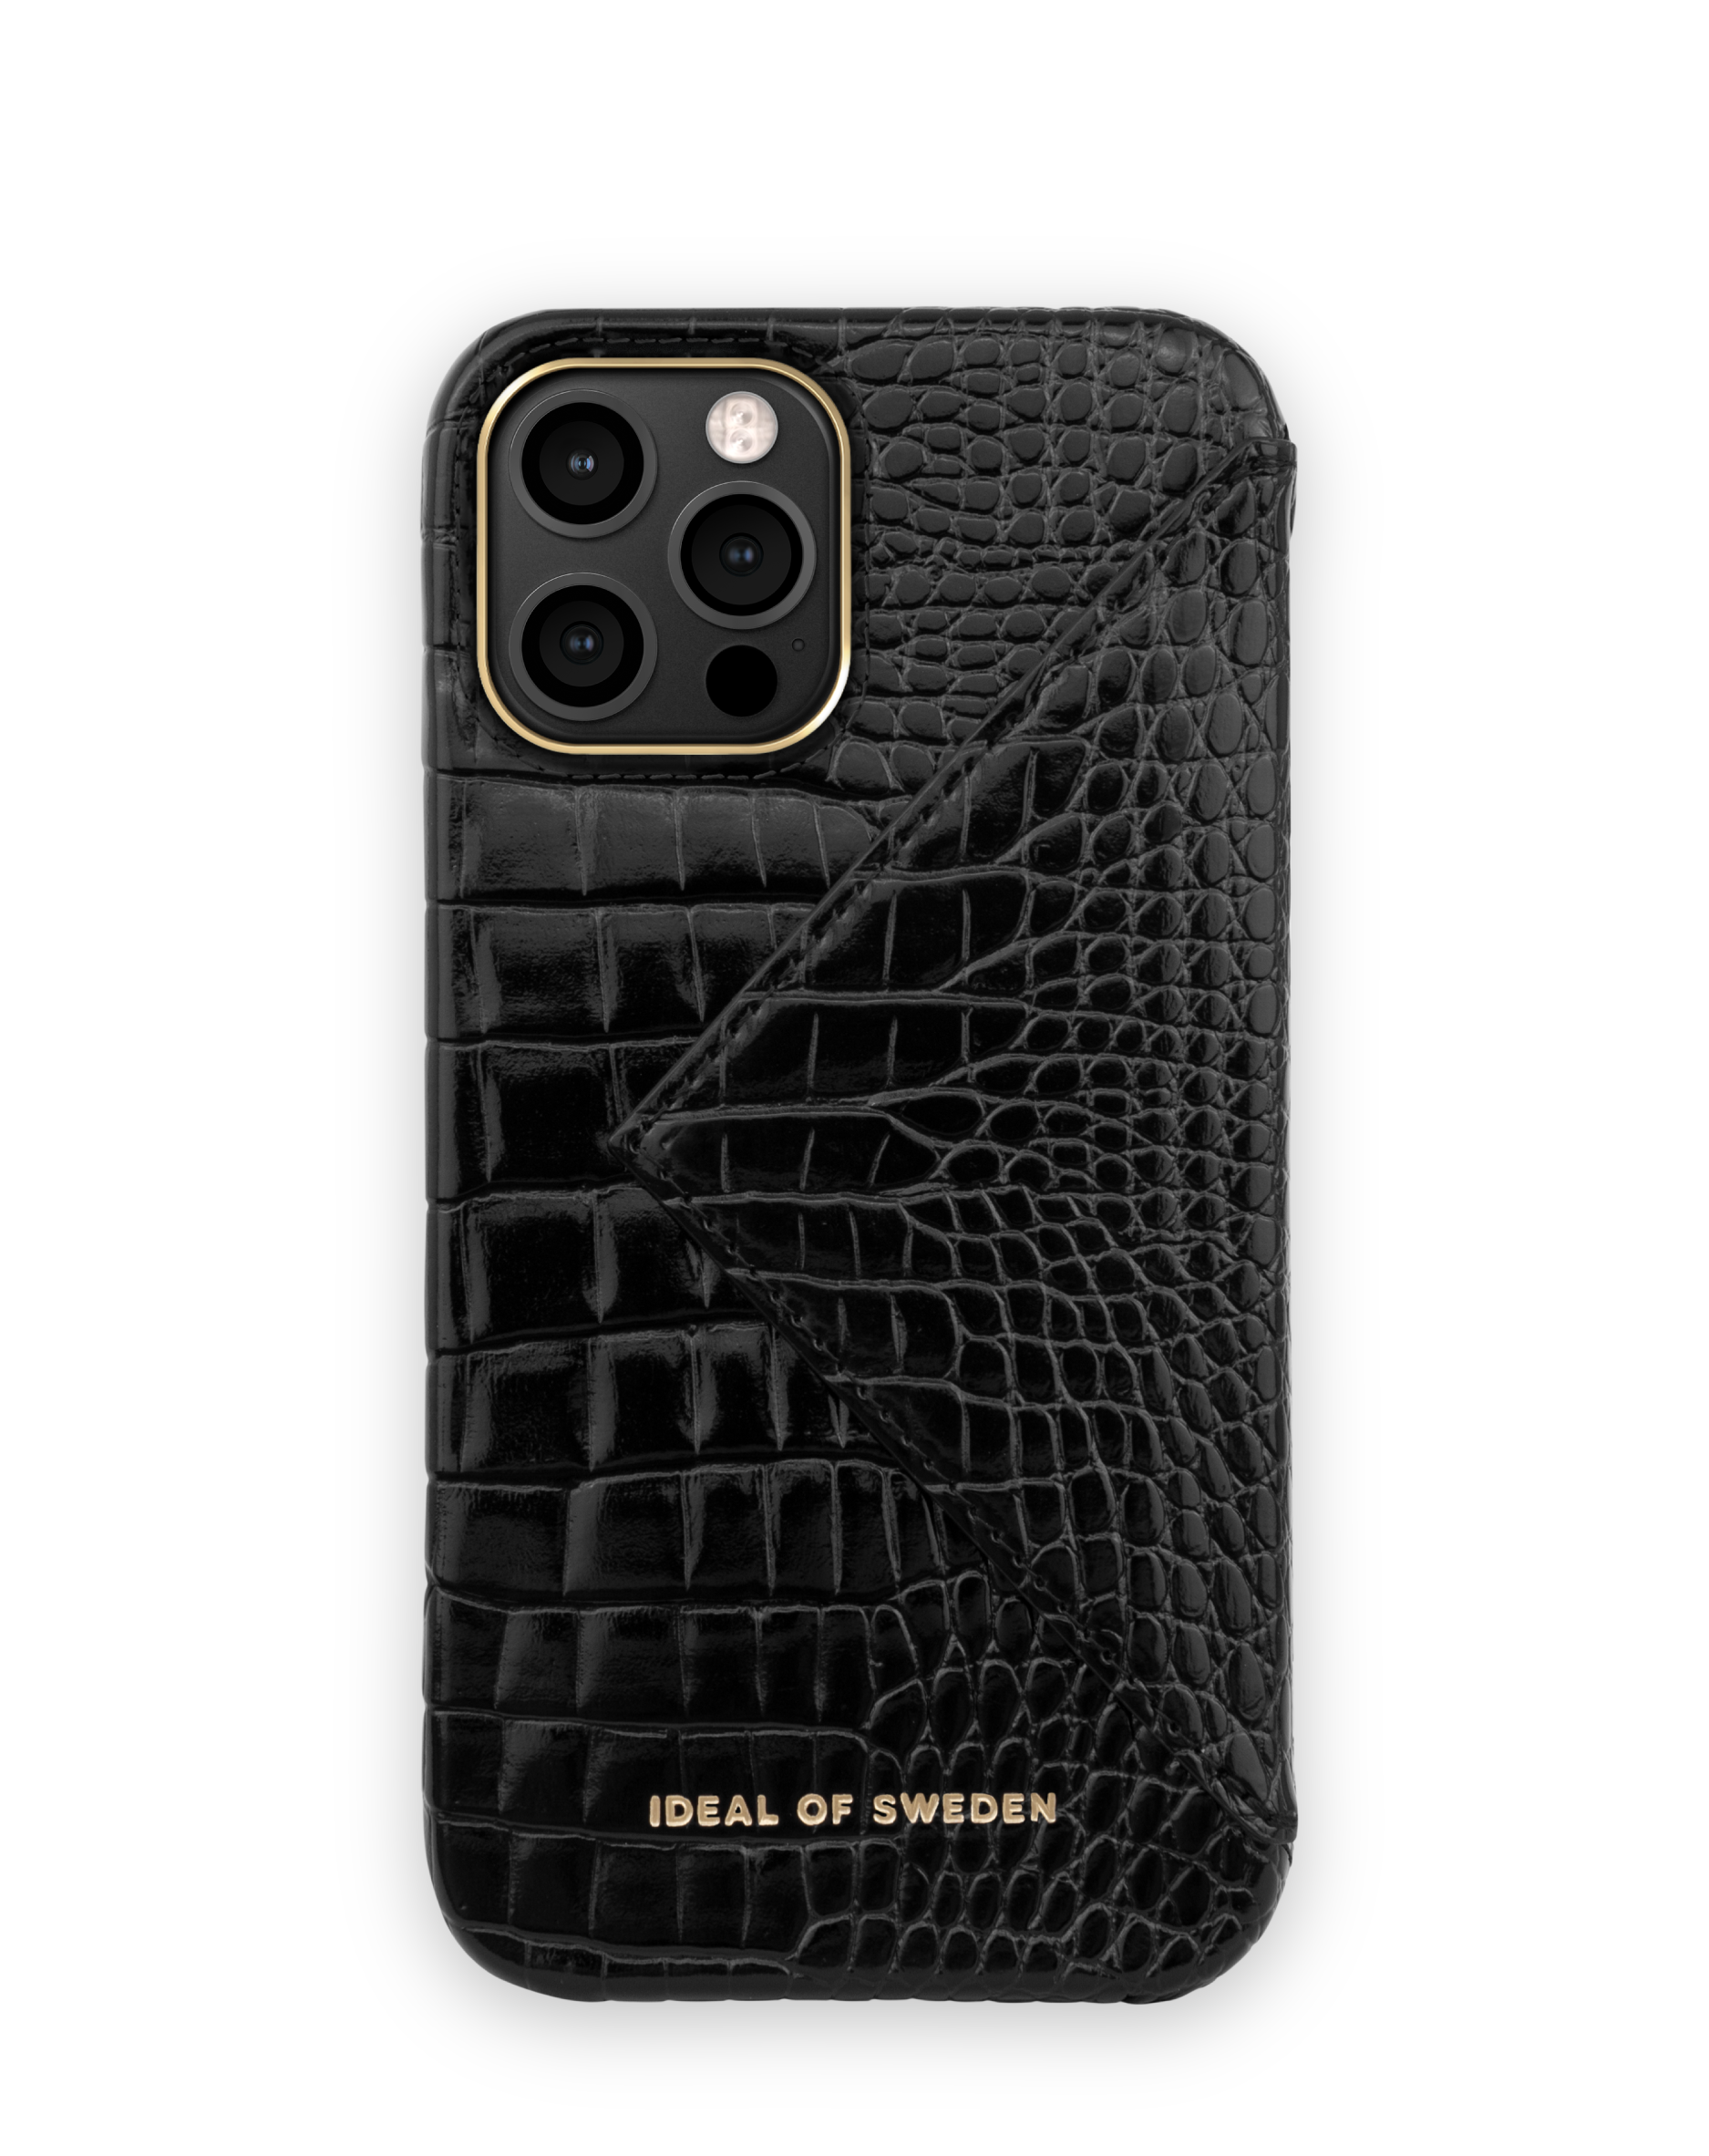 IDEAL OF SWEDEN IDSCAW20-2067, Backcover, Noir Croco Apple, Max, Pro IPhone 12 Neo